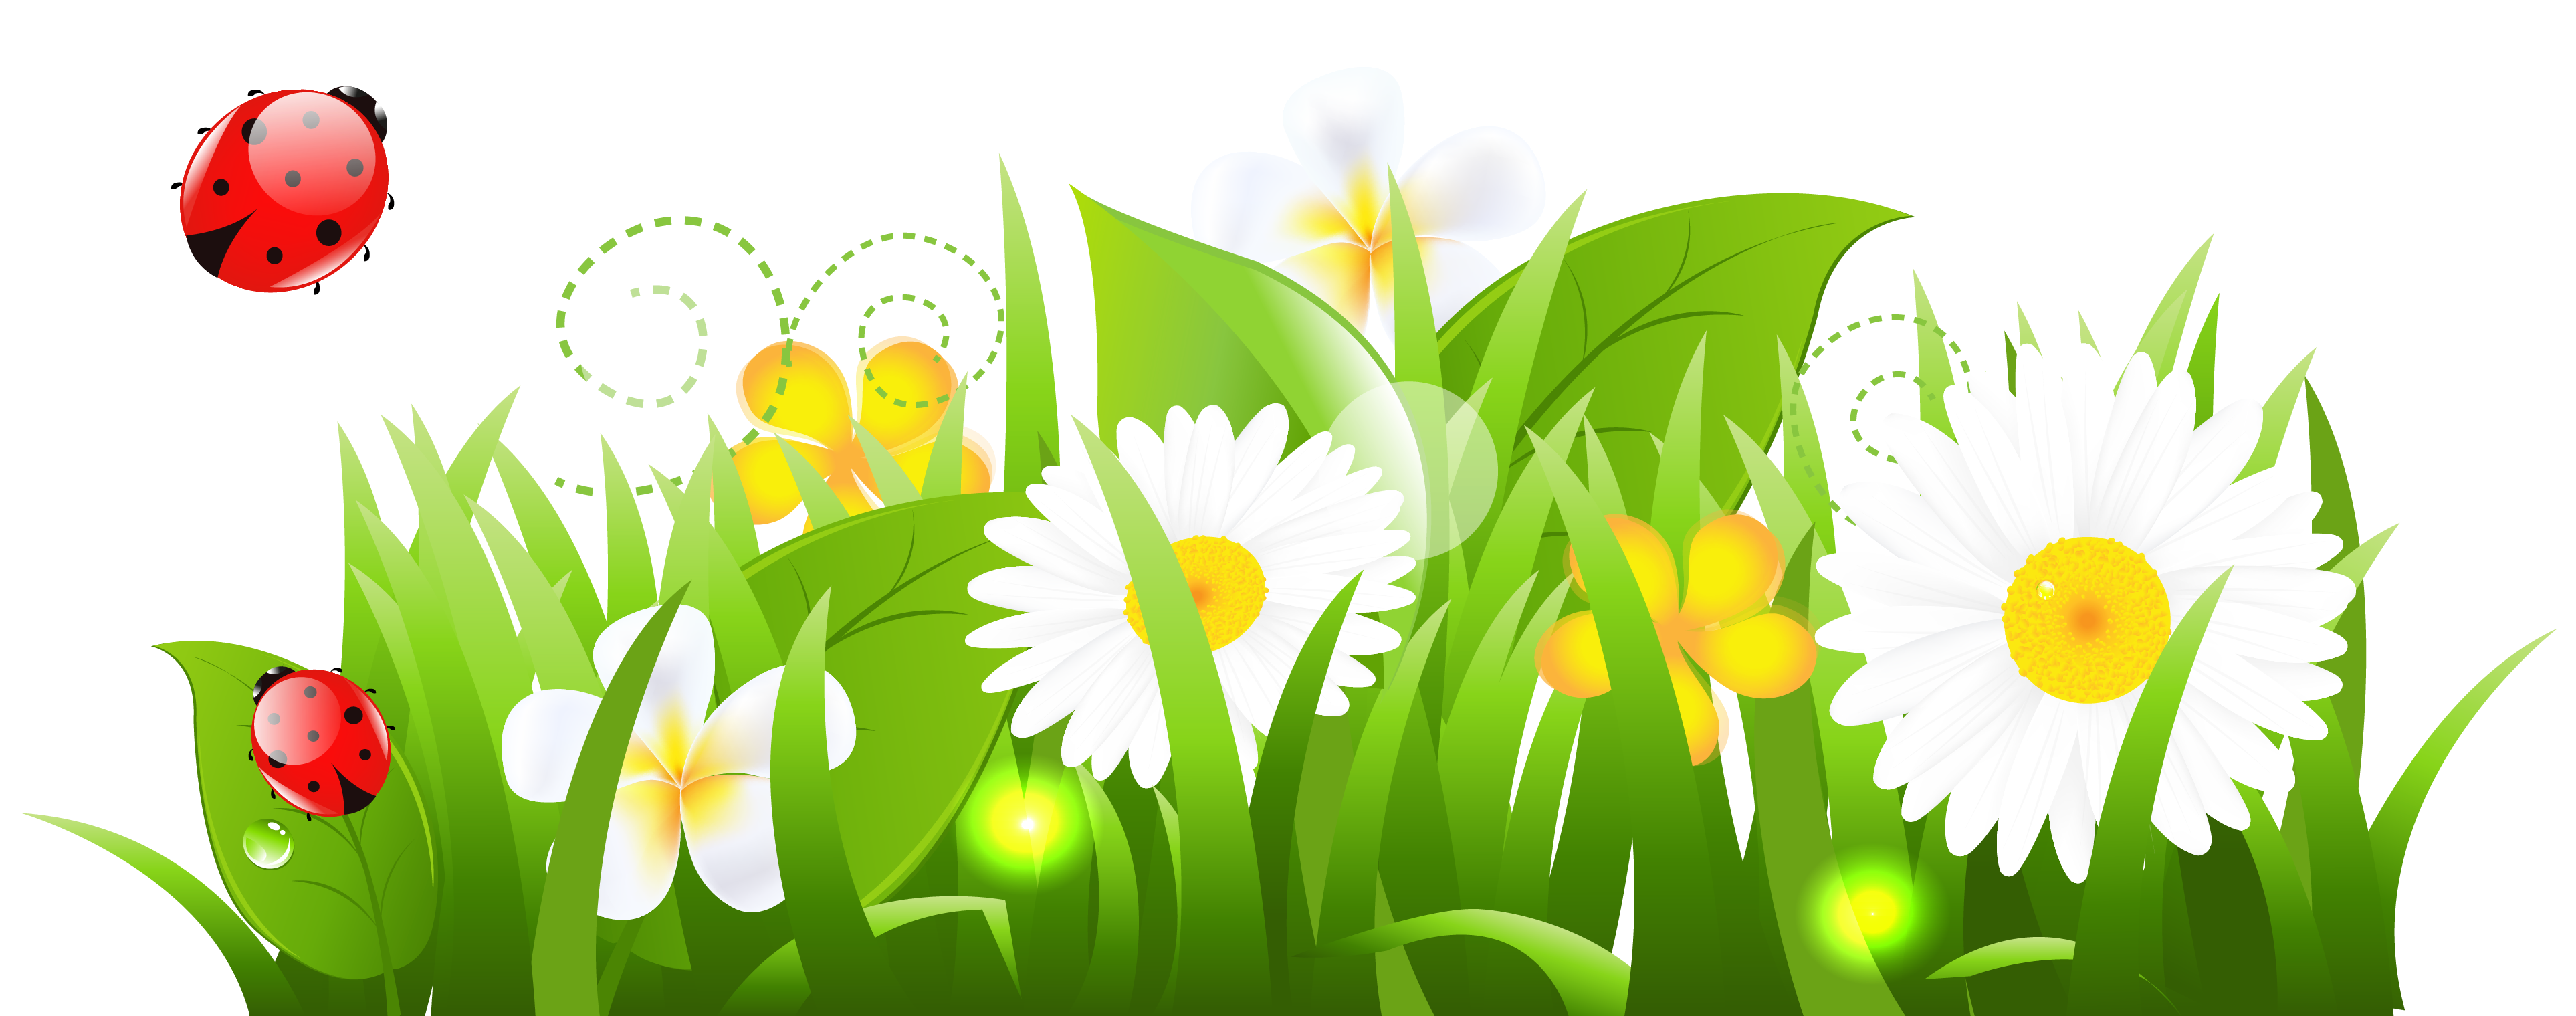 Grass And Flowers Hd Photo Clipart